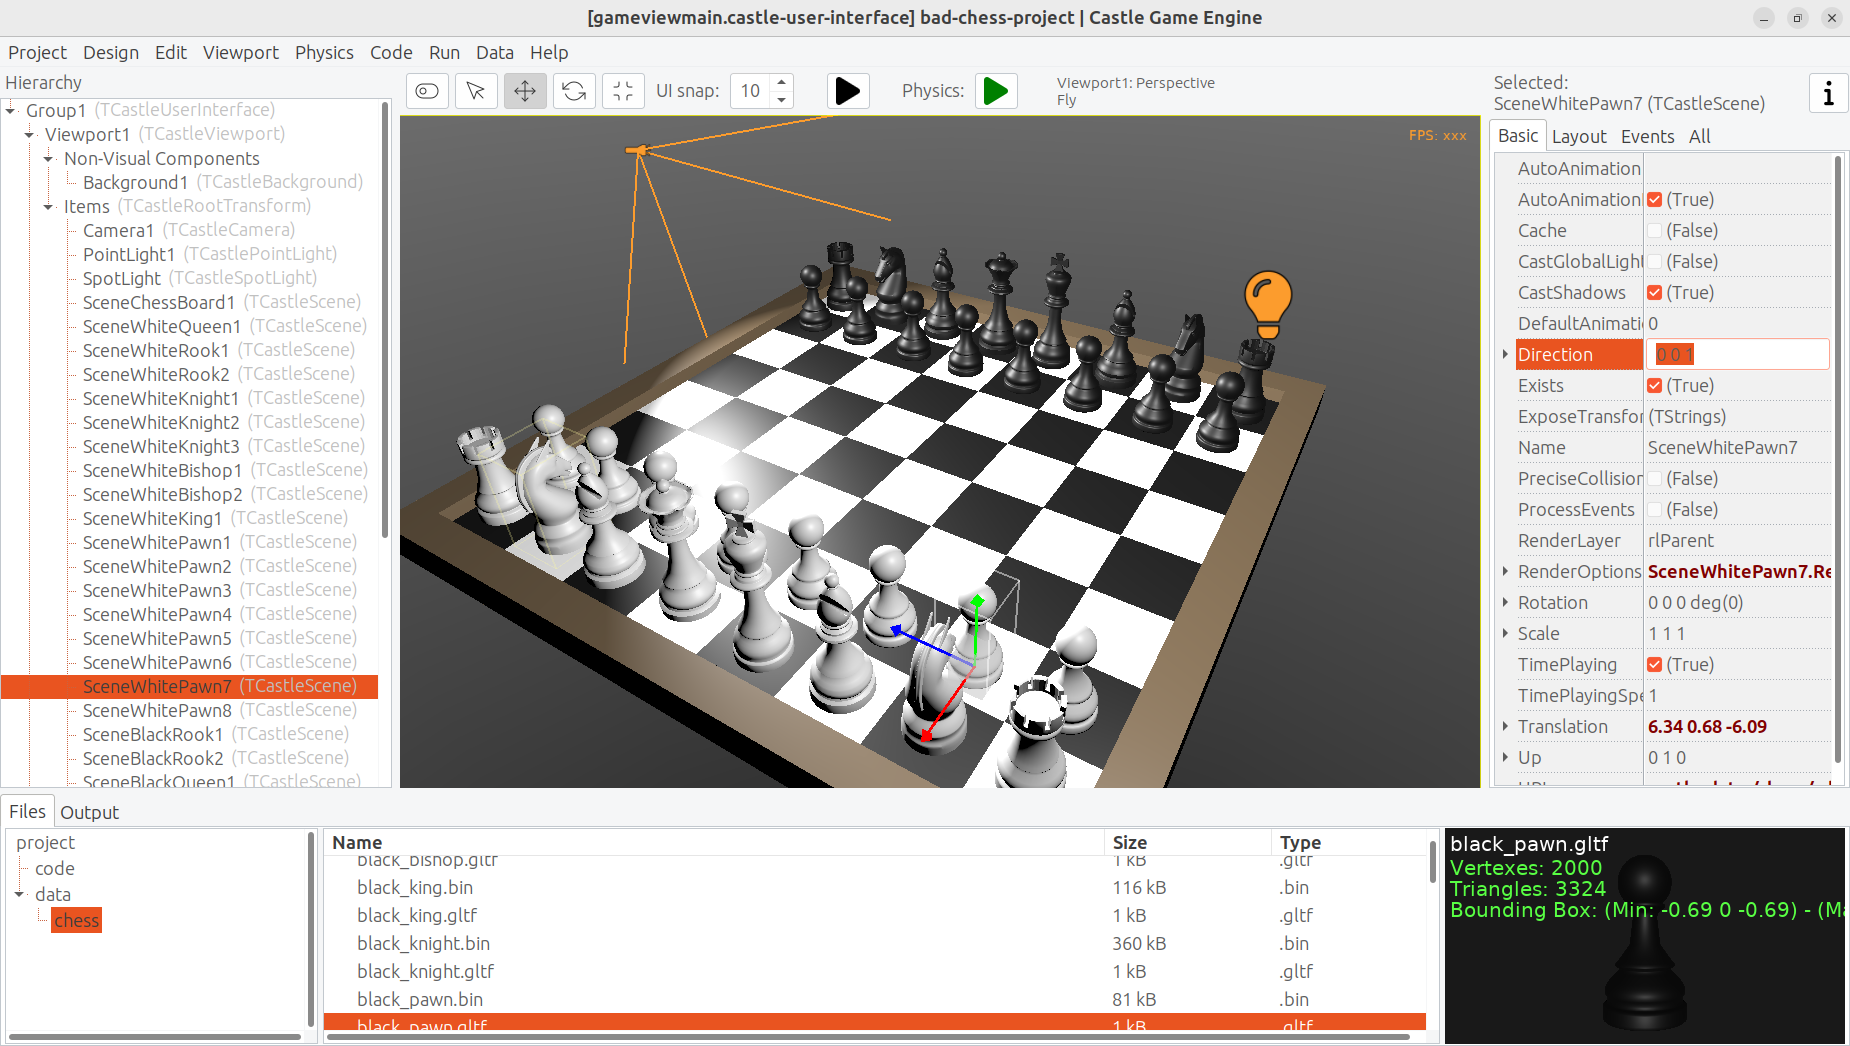 Chessboard with chess pieces designed in the editor